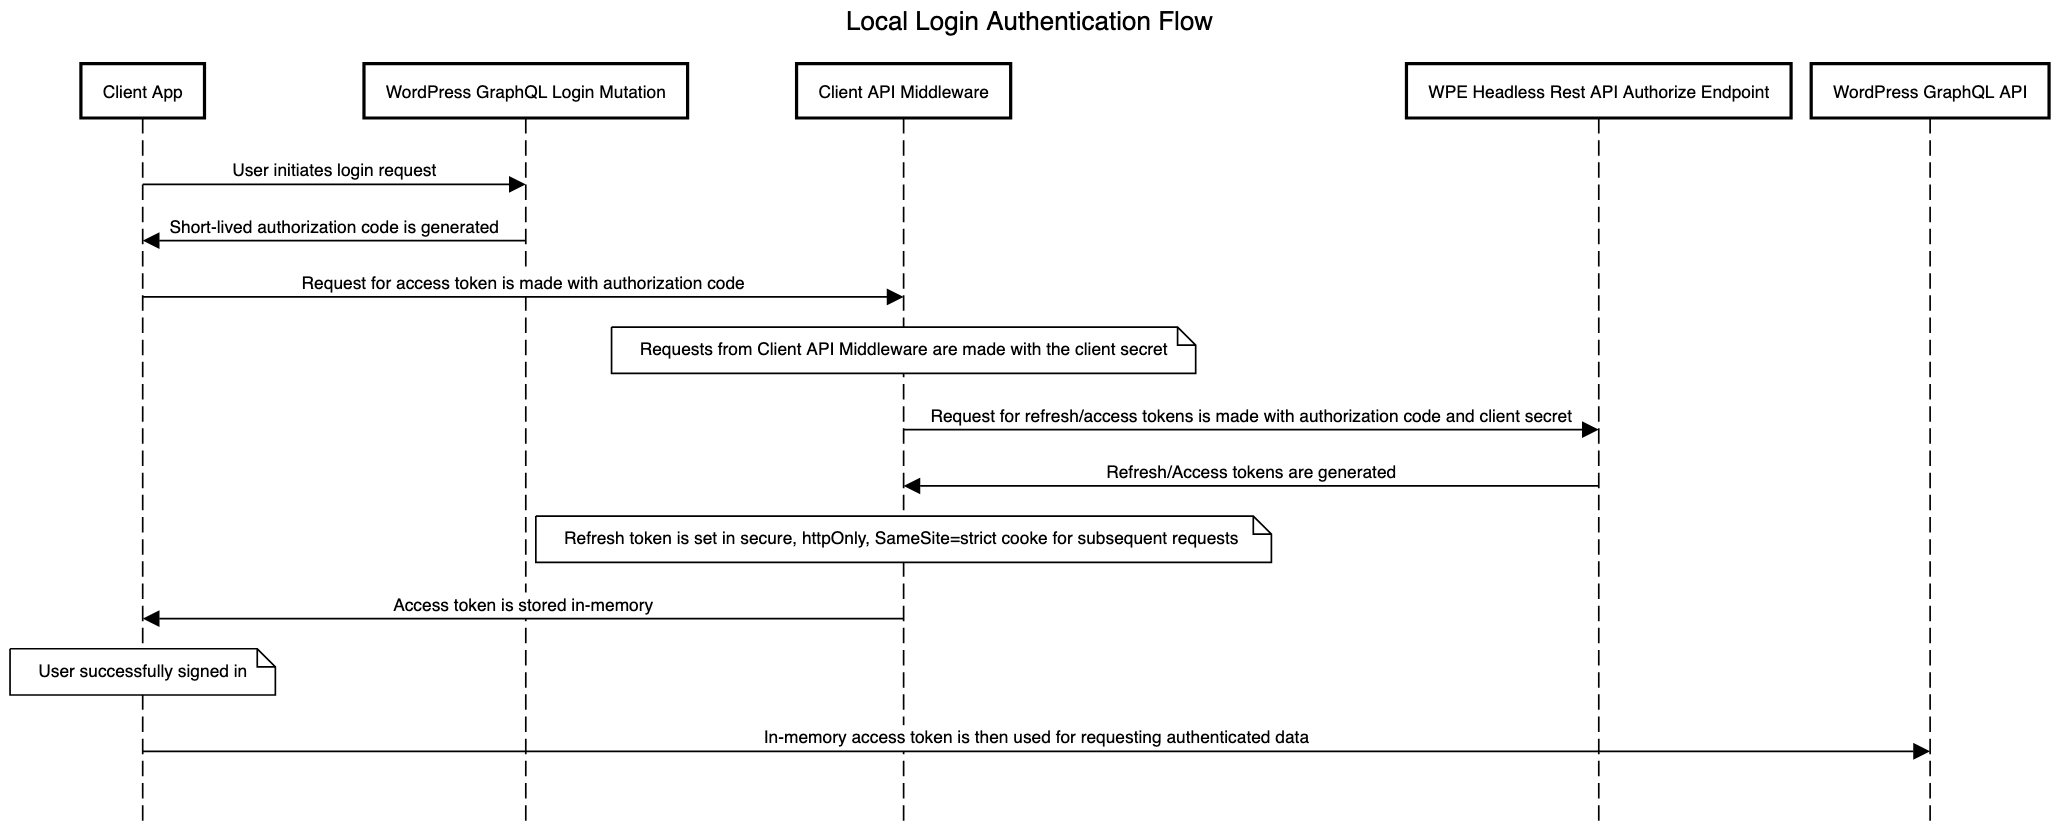 Diagram of the local based authentication flow